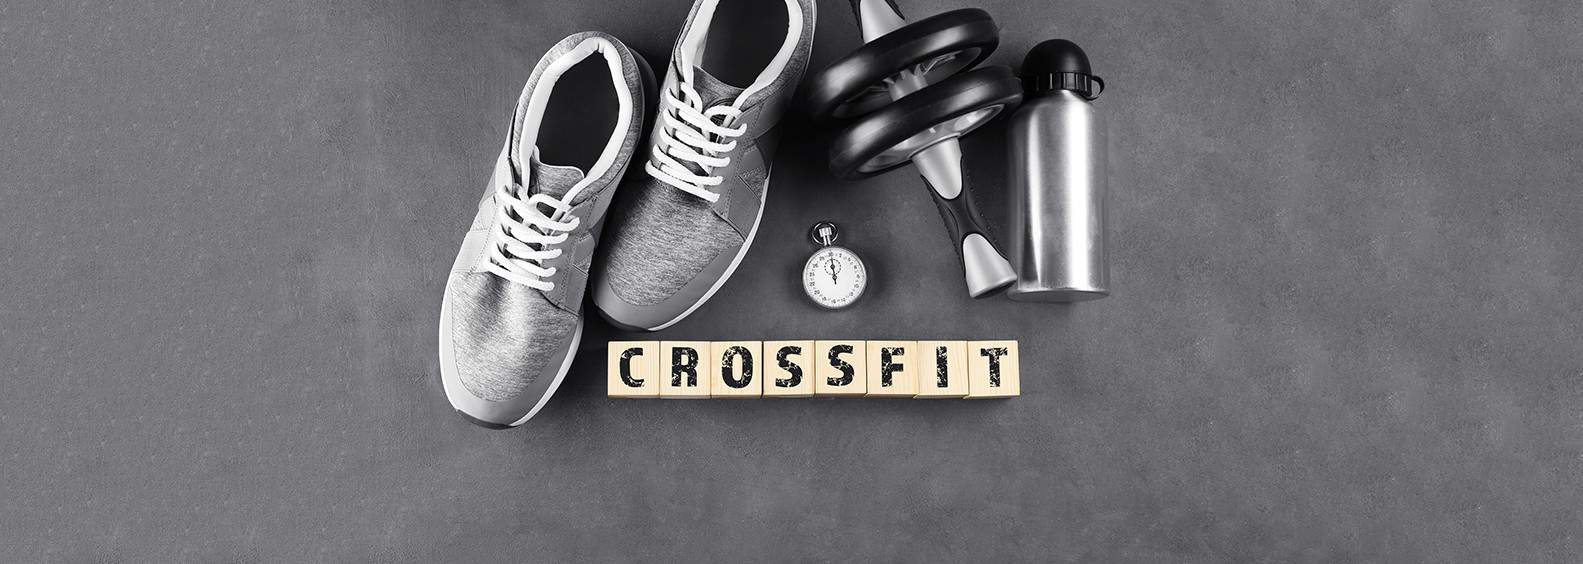 Crossfit shoes for the workout